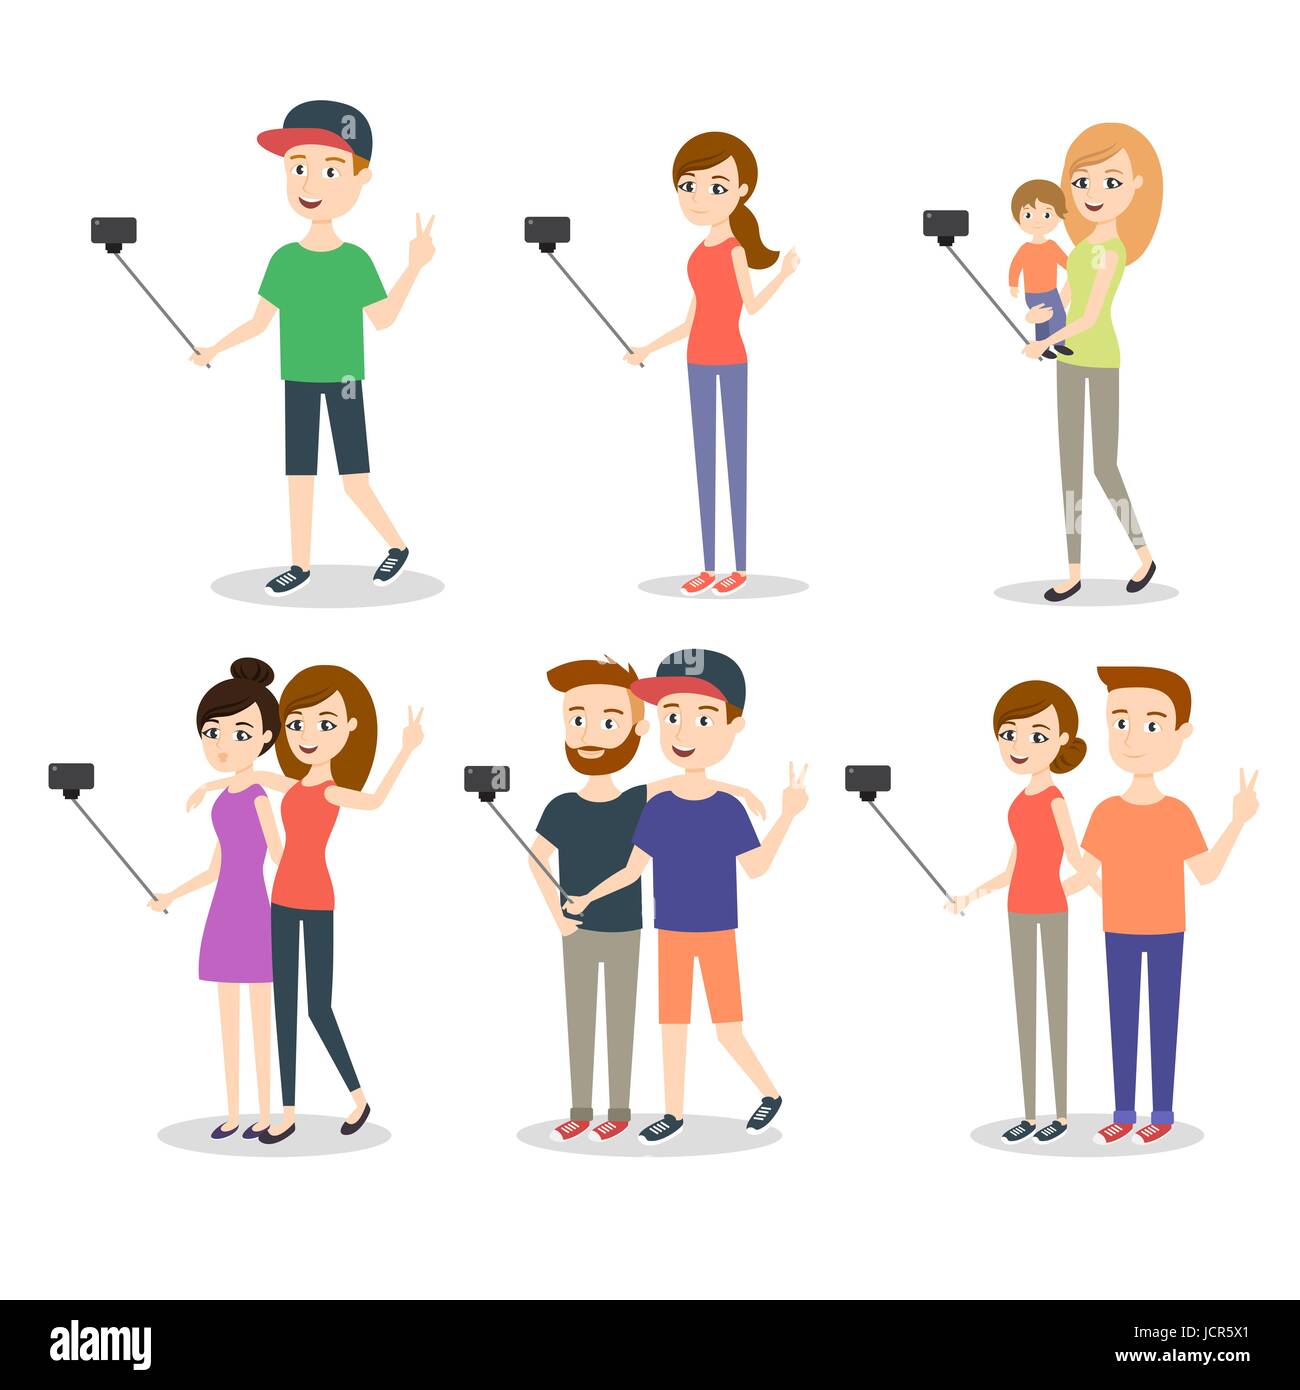 Vector illustration of people making selfie. Couples and friends, woman with kid, man, teenagers, gay. Concept of modern life. Stock Vector